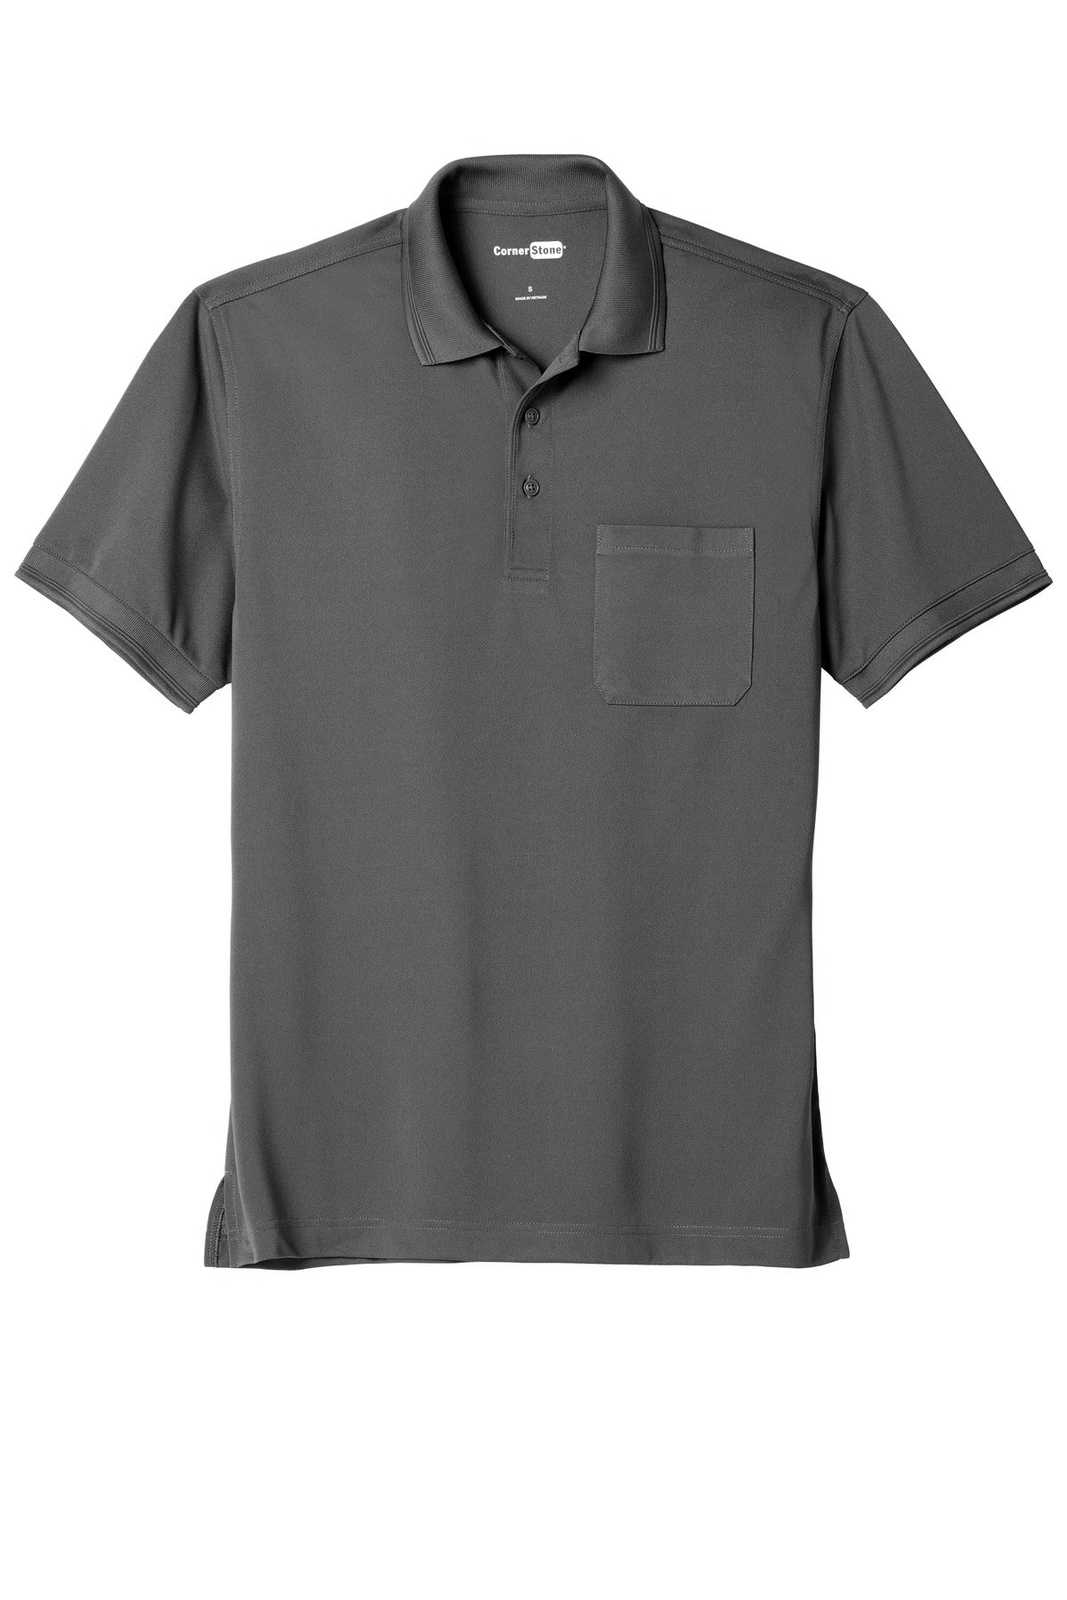 CornerStone CS4020P Industrial Snag-Proof Pique Pocket Polo - Charcoal - HIT a Double - 5